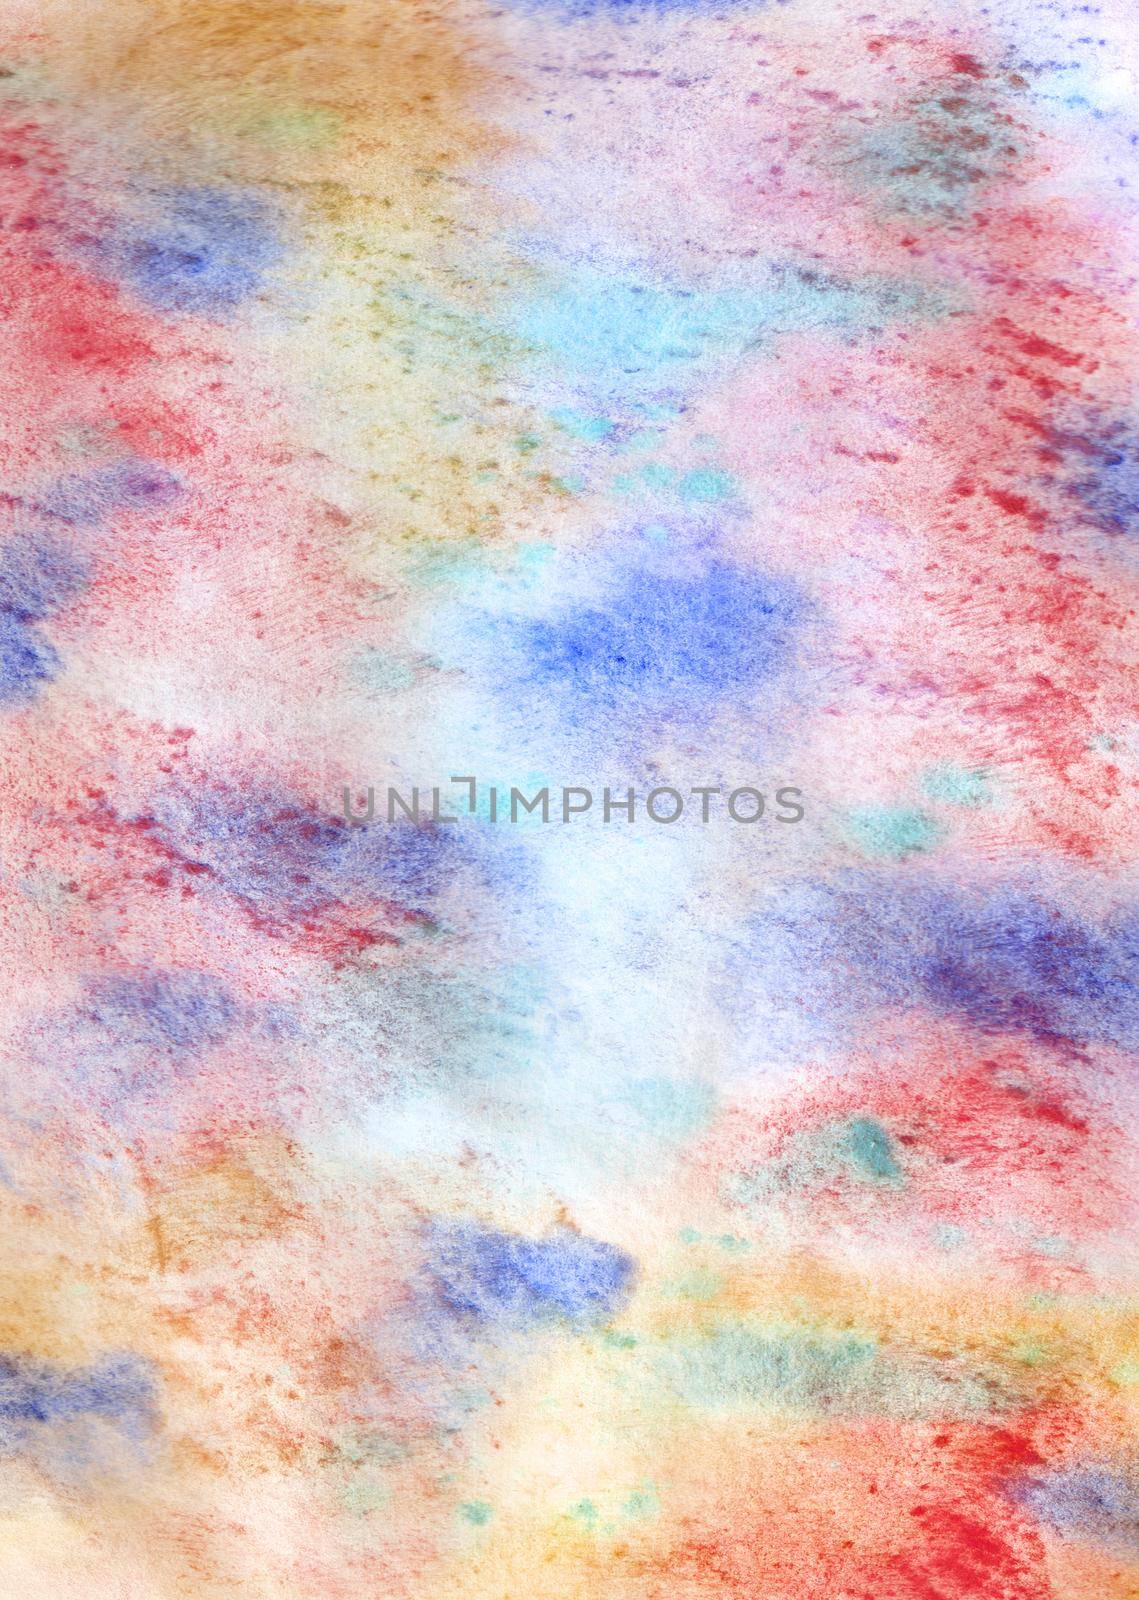 Color abstract watercolor background with texture effect and smooth transitions in different colors. illustration for posters, postcards, banners and creative design.
 by Grommik